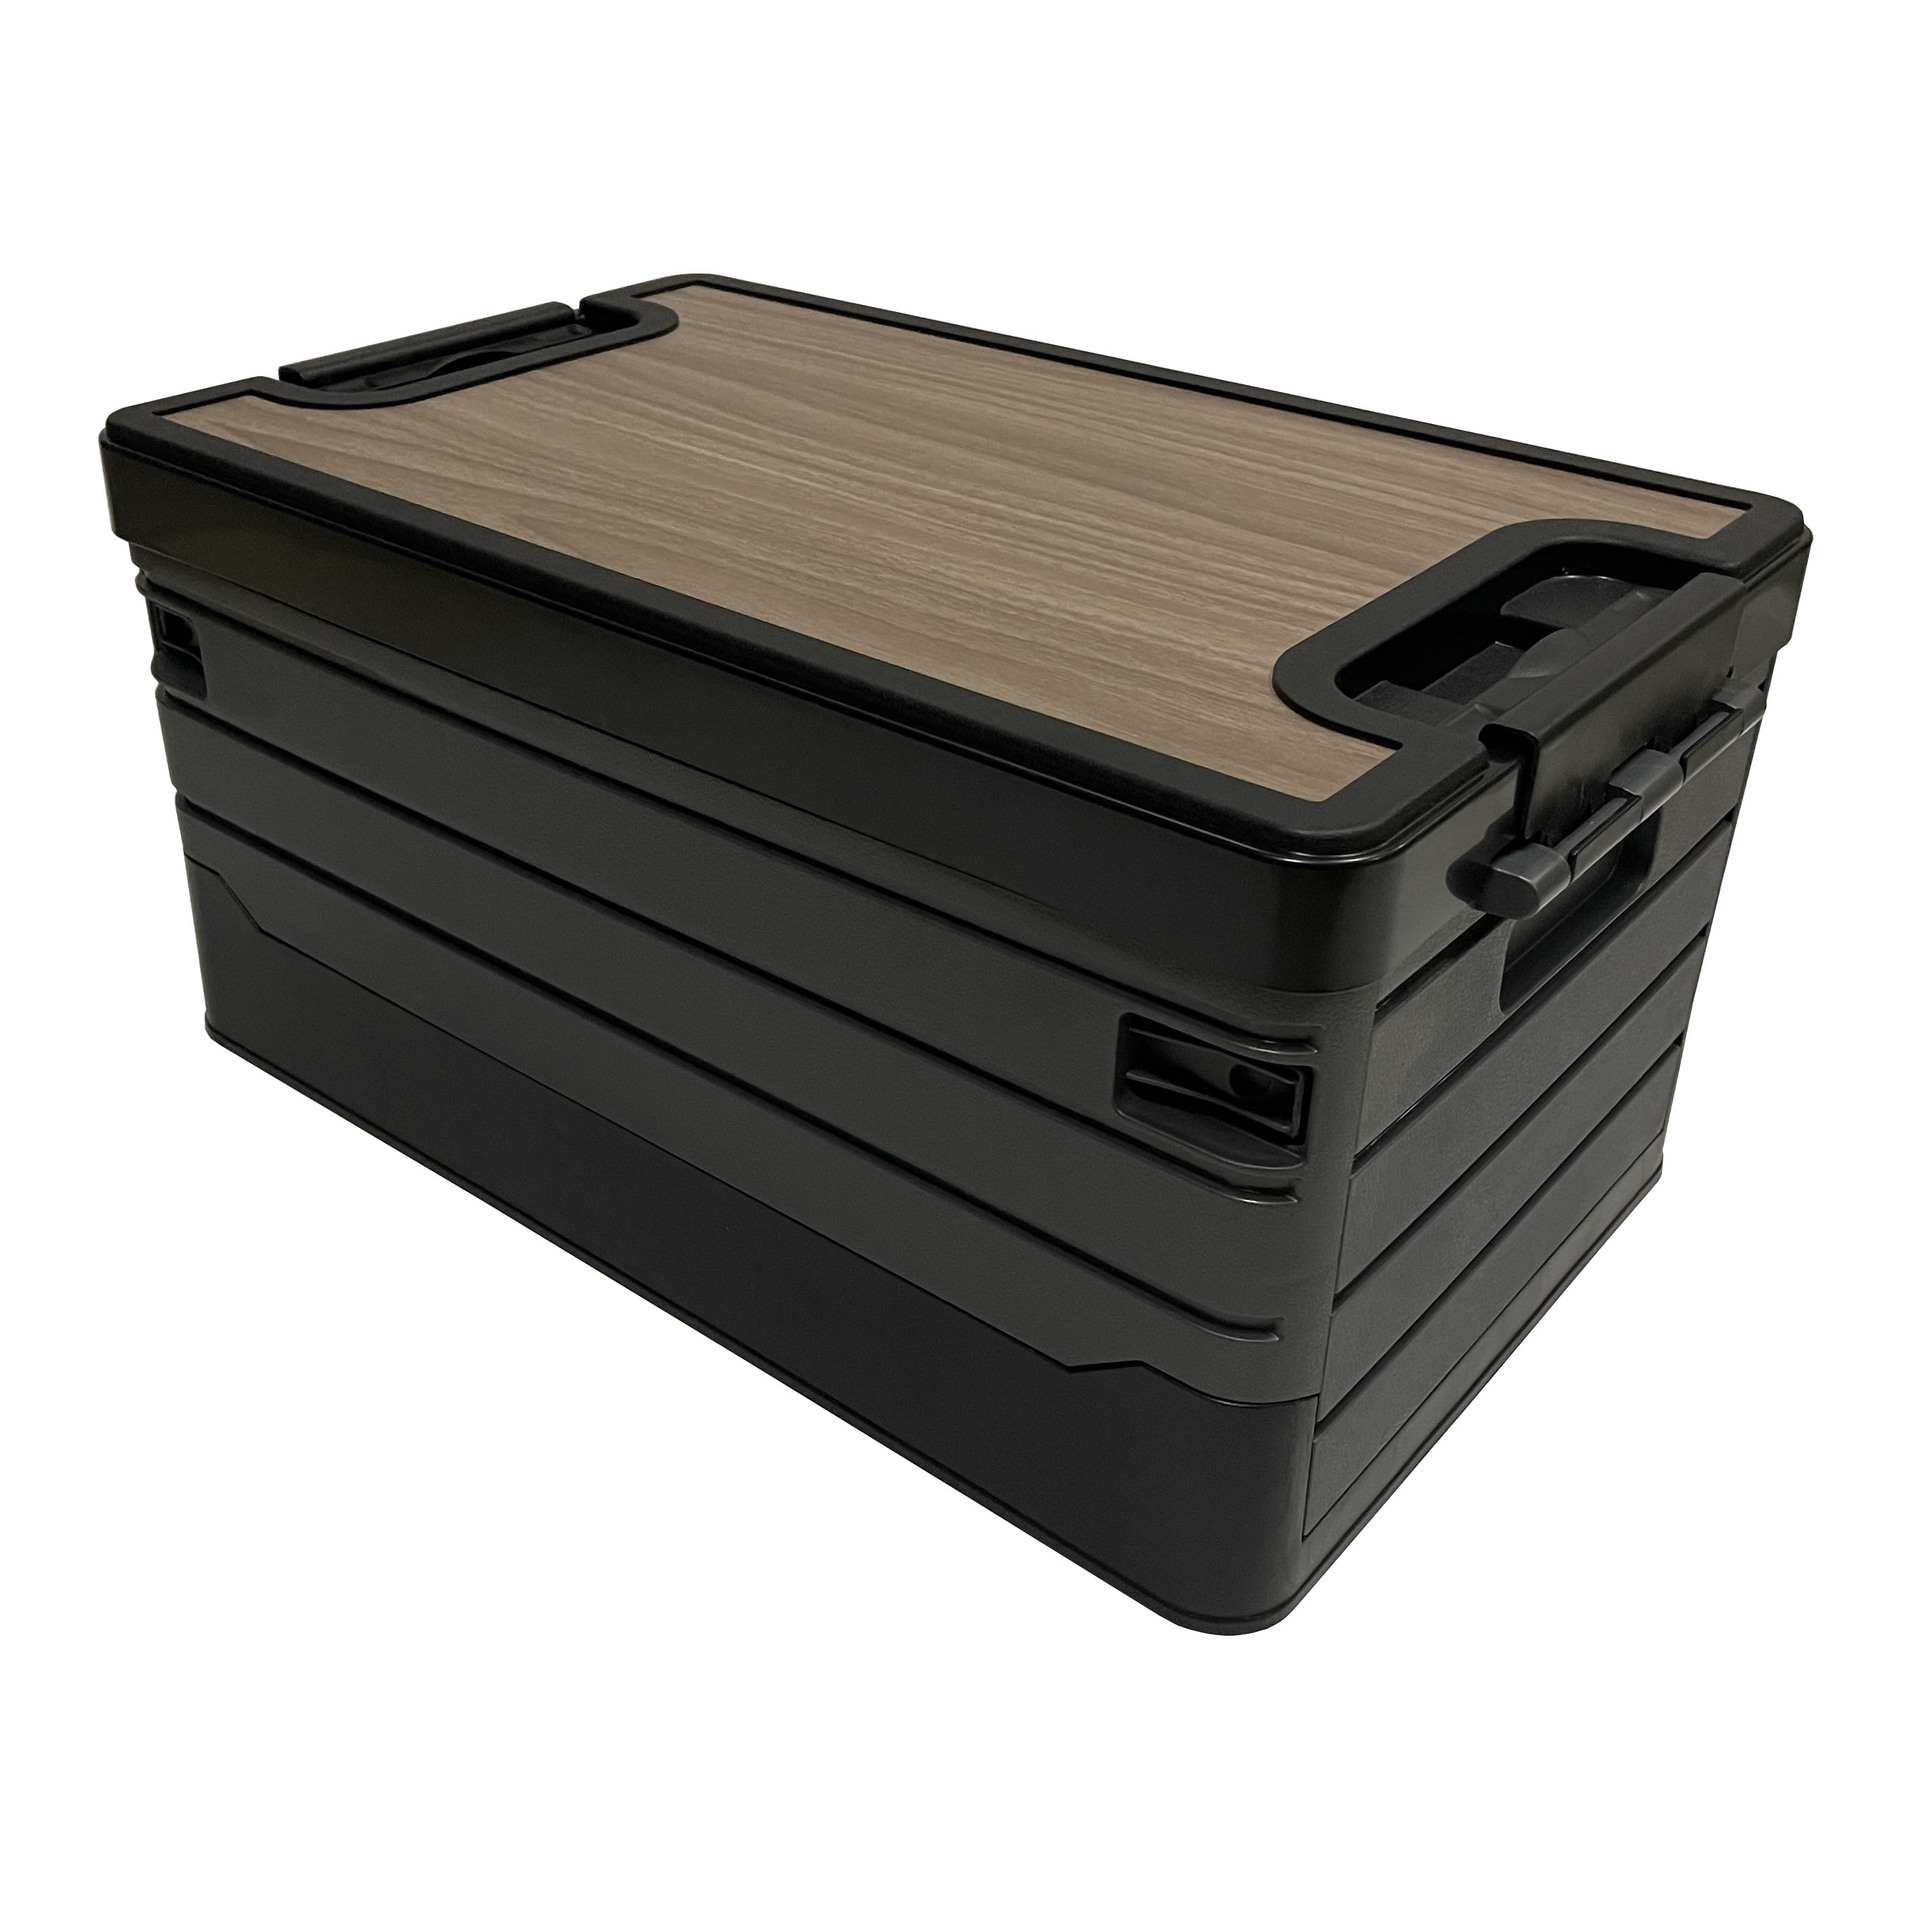 Multifunctional outdoor portable foldable storage box